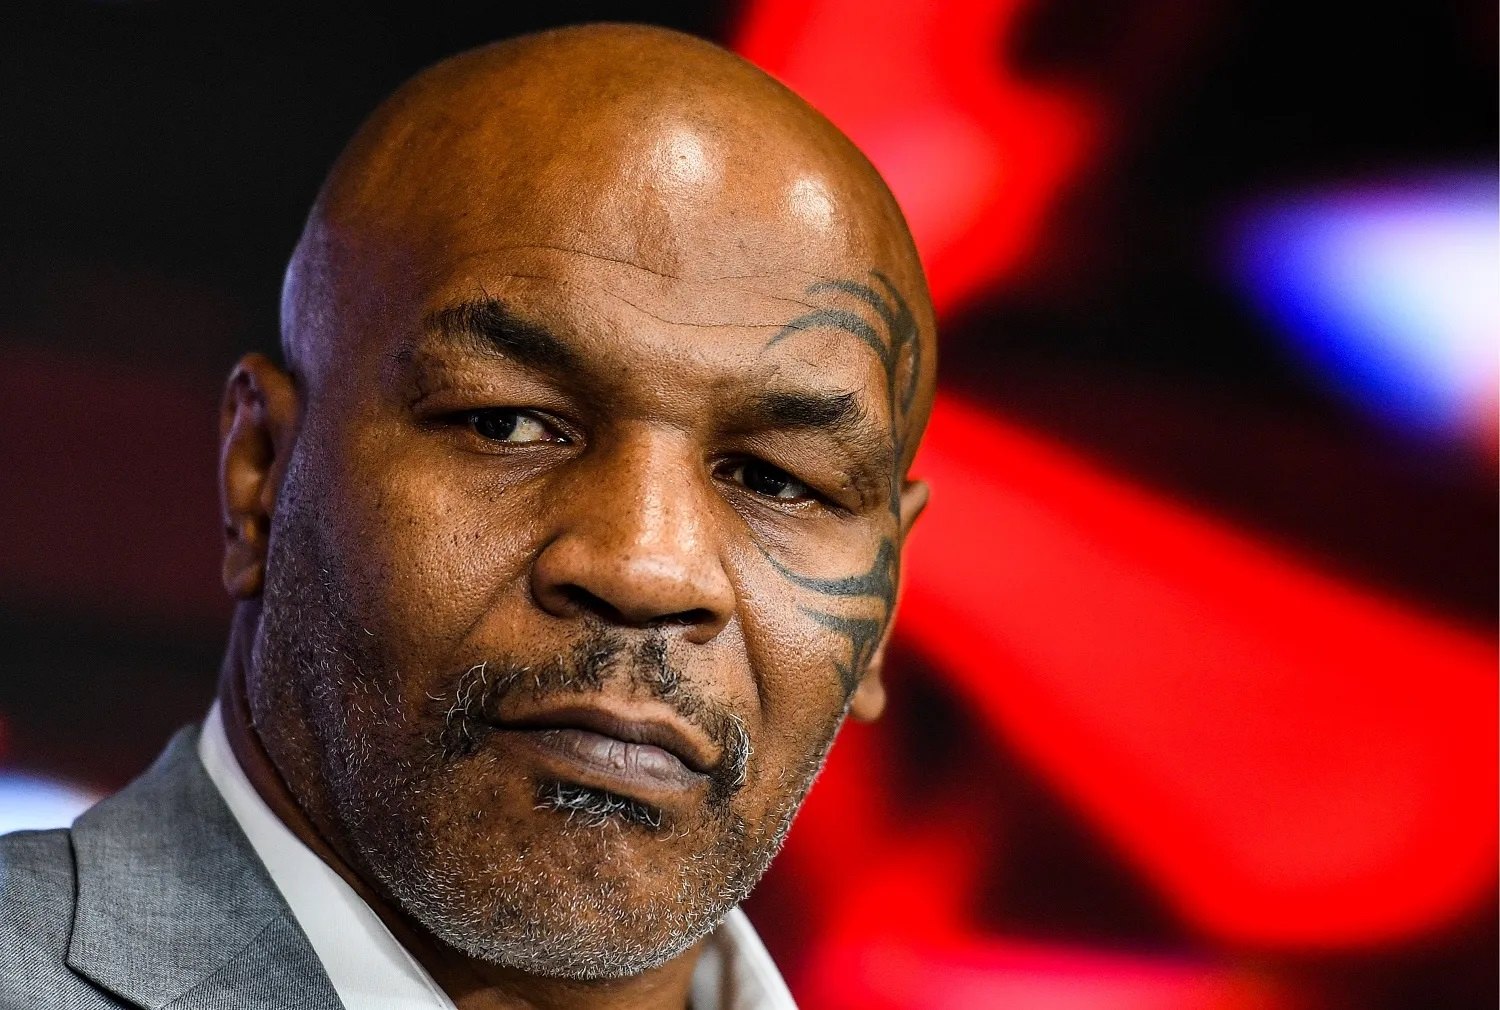 man-assaulted-by-mike-tyson-on-plane-demands-450k-boxers-lawyer-calls-it-a-shakedown